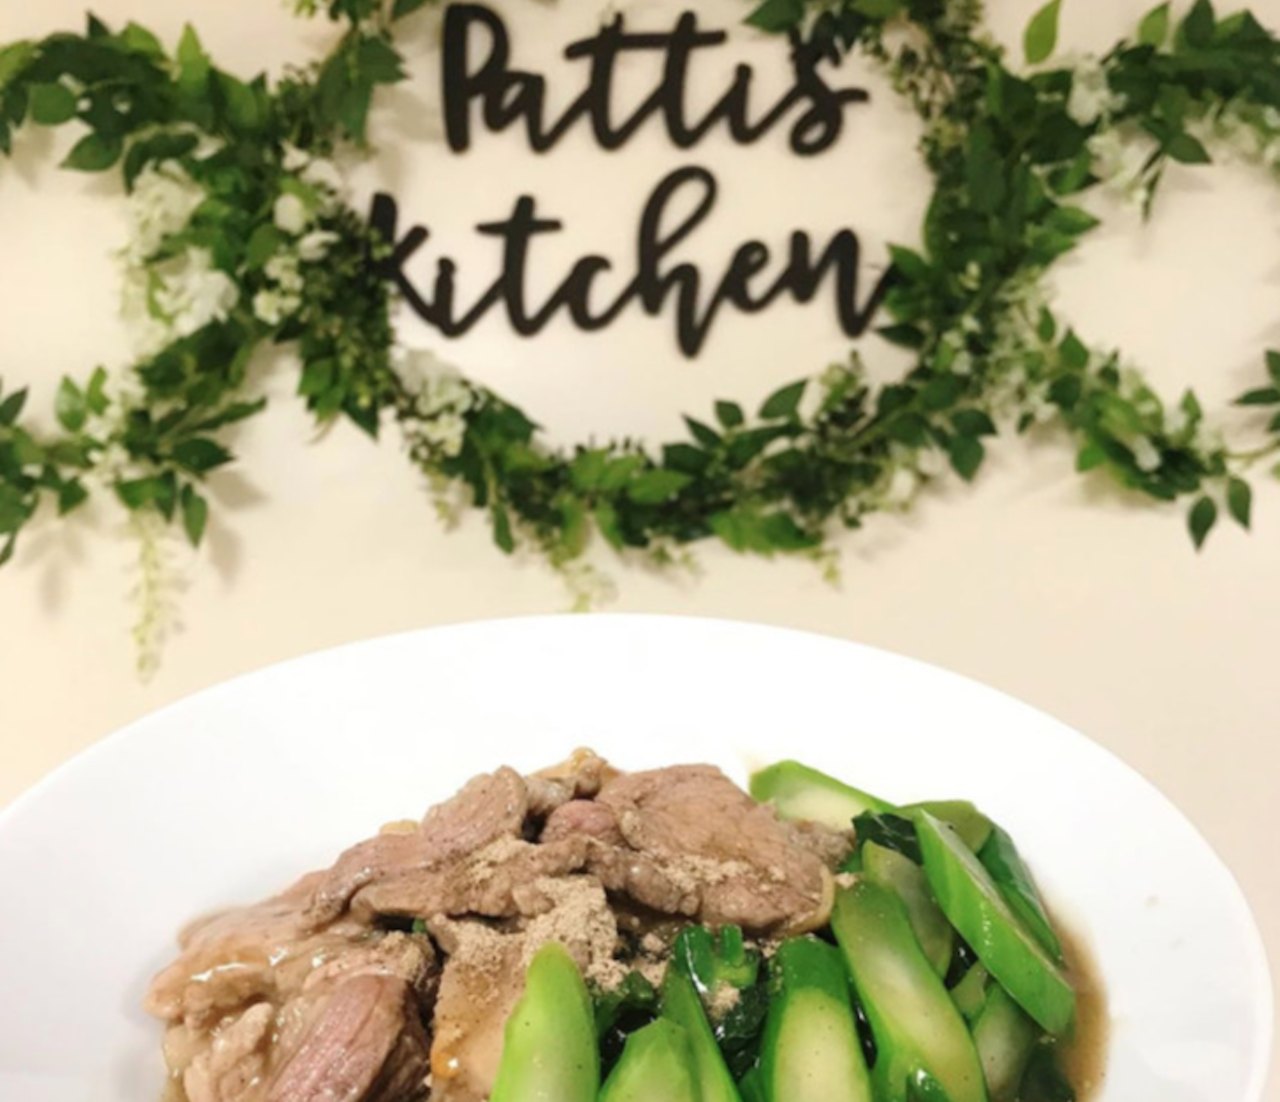 Patti&#146;s Kitchen
6527 Park Blvd., Pinellas Park
Slurp down some Thai street noodle soup at Patti&#146;s Kitchen in Pinellas Park. Keaw Nam, made with homemade pork wonton, Tew Ped Toon, served with steamed duck, herbal duck soup and Chinese broccoli, and pad thai, are all made there.
pattiskitchen/Instagram